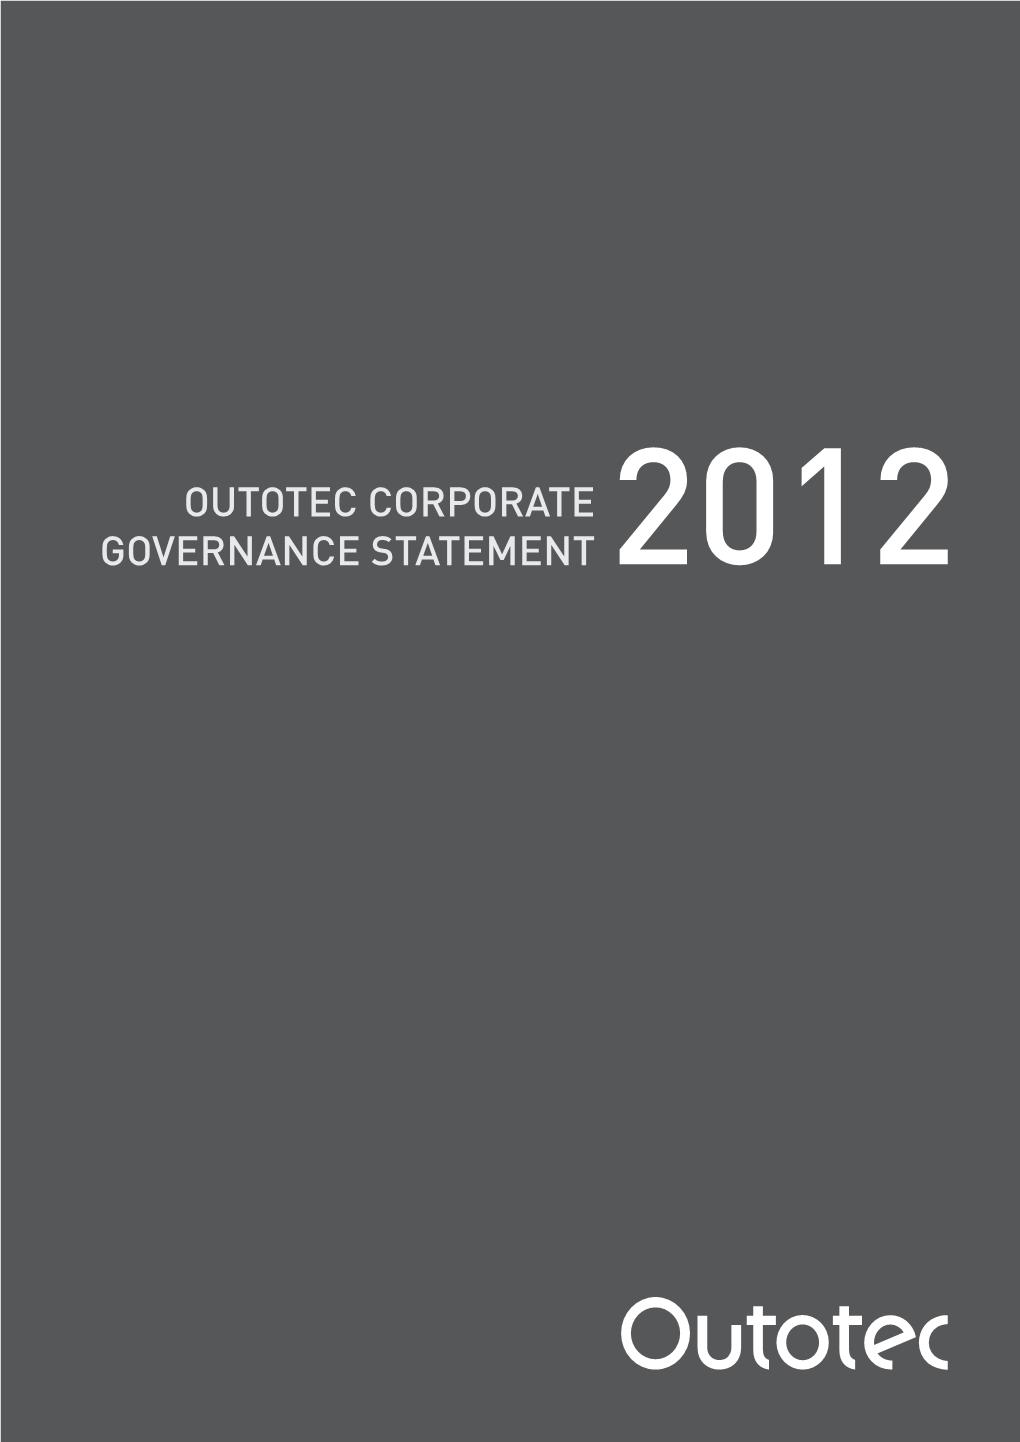 Outotec Corporate Governance Statement Outotec’S Corporate Governance Statement 2012